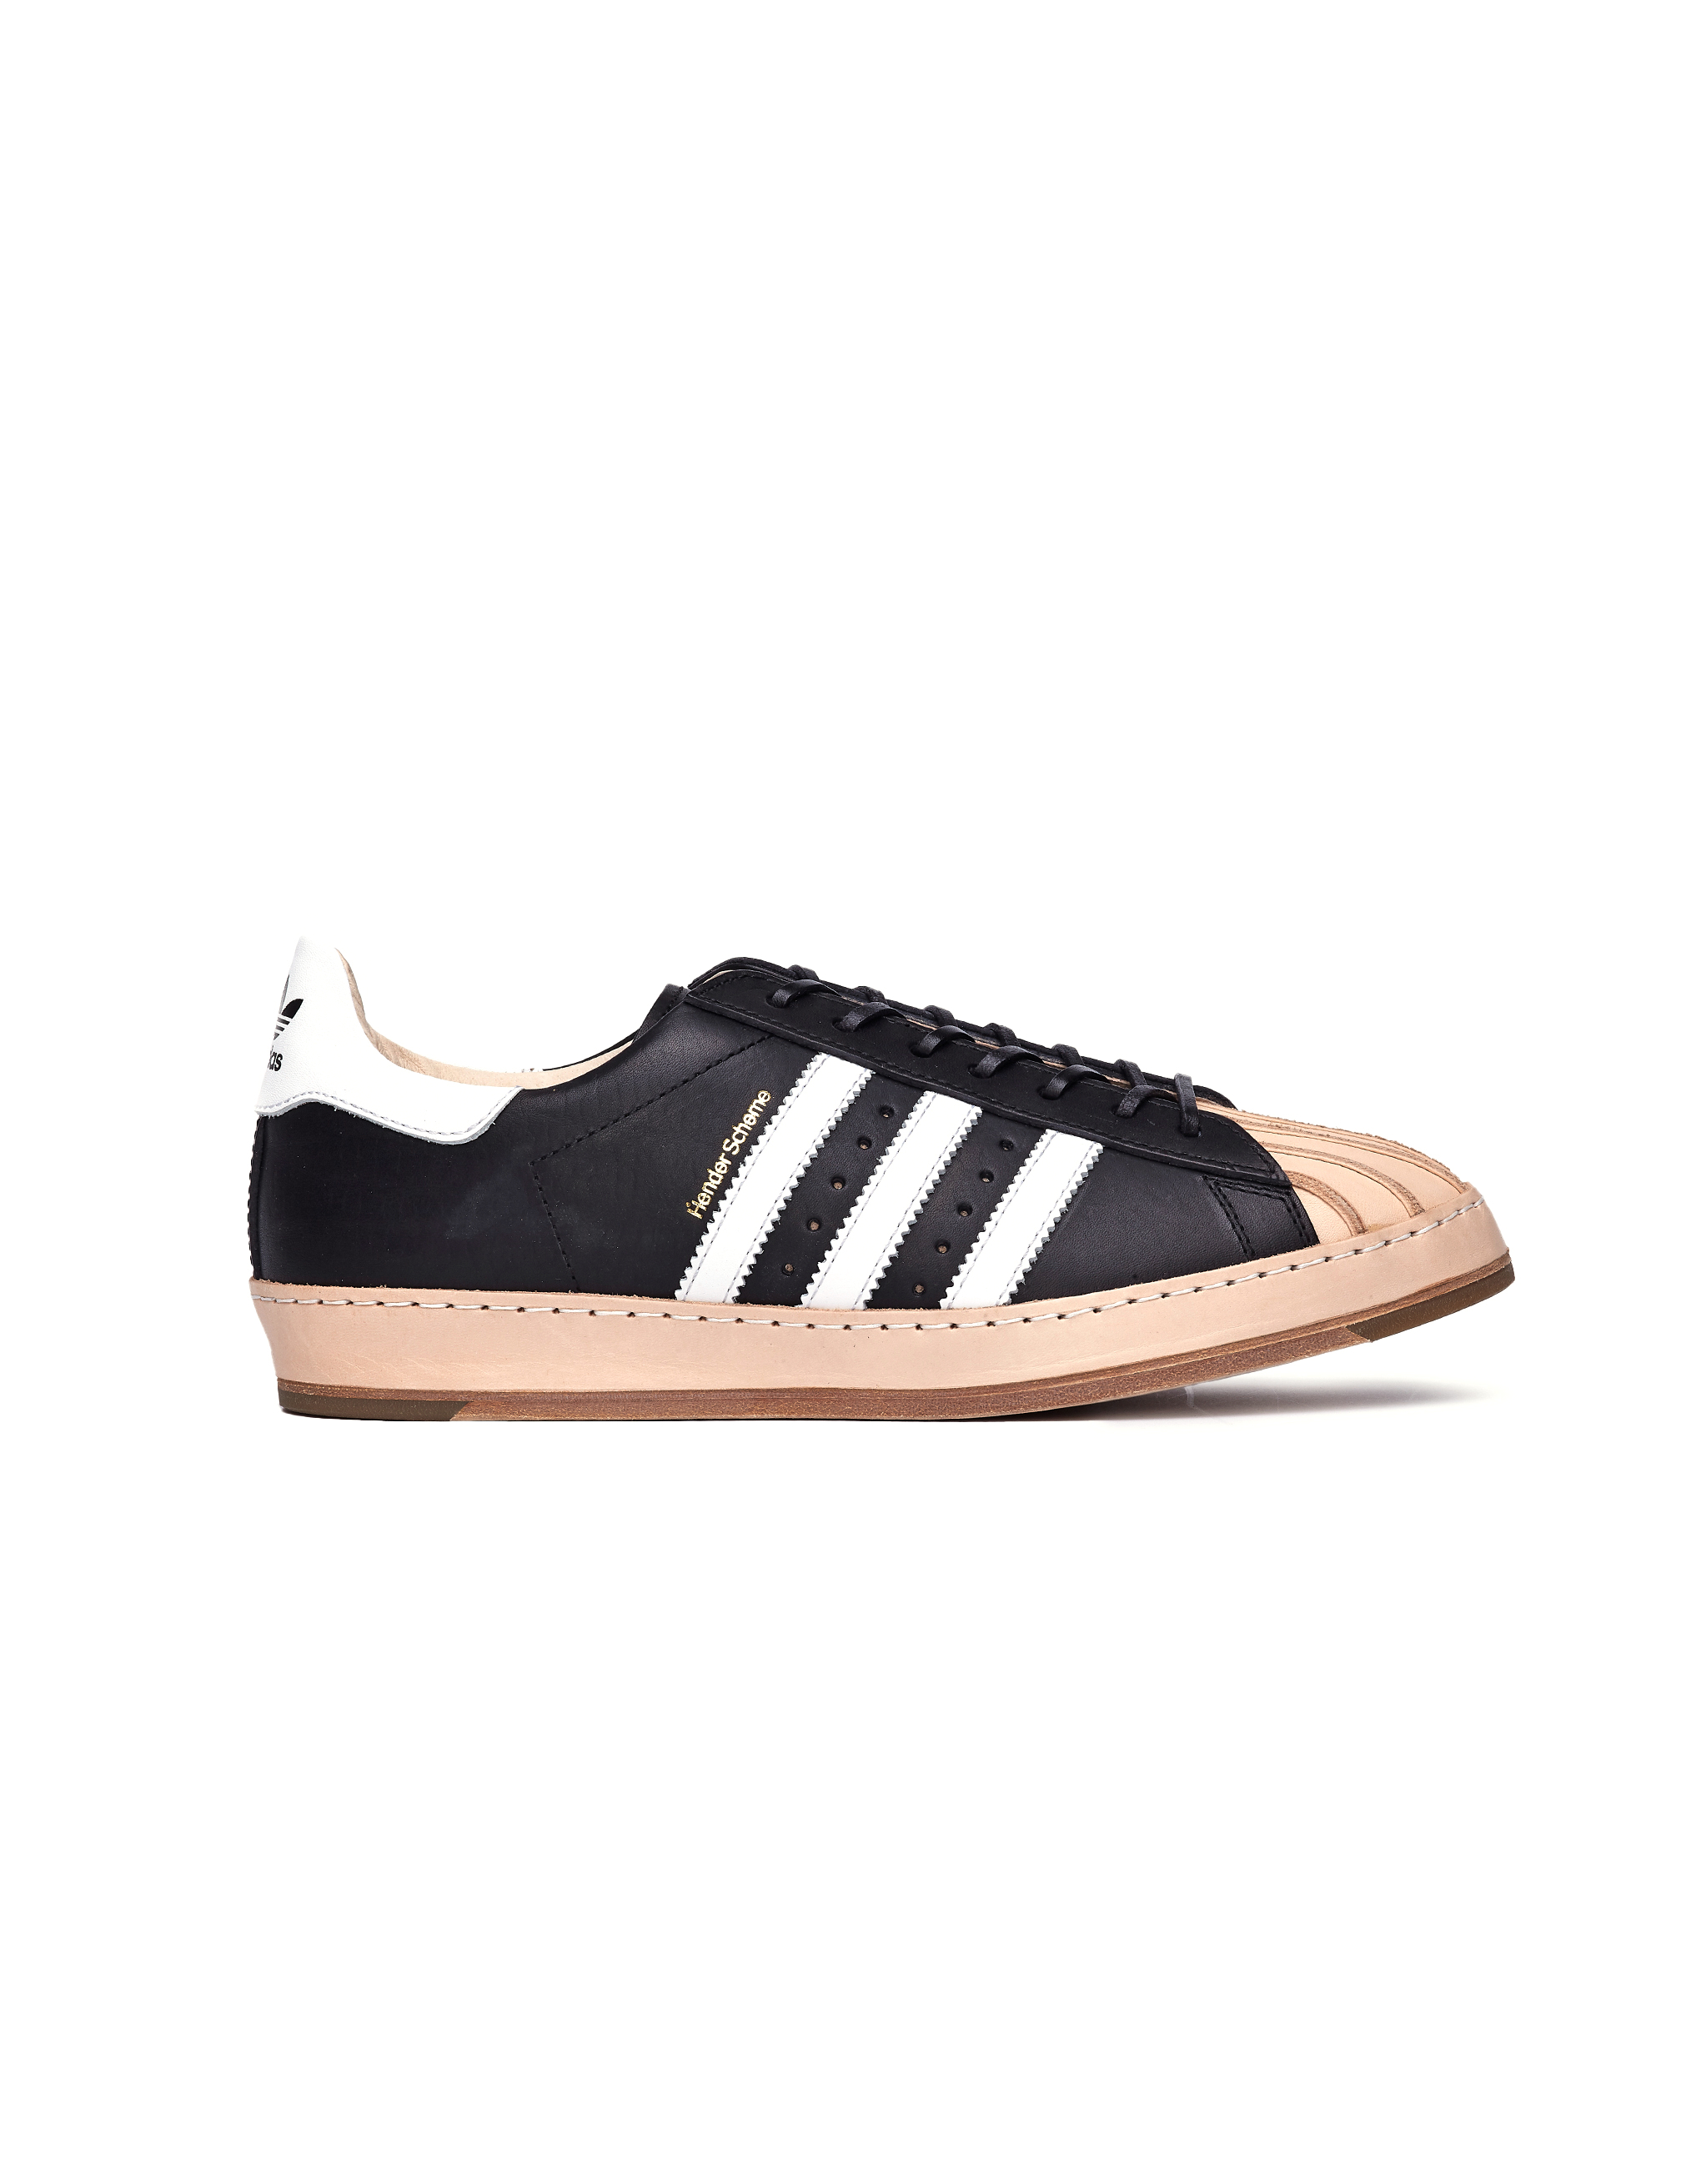 adidas superstar leather shoes